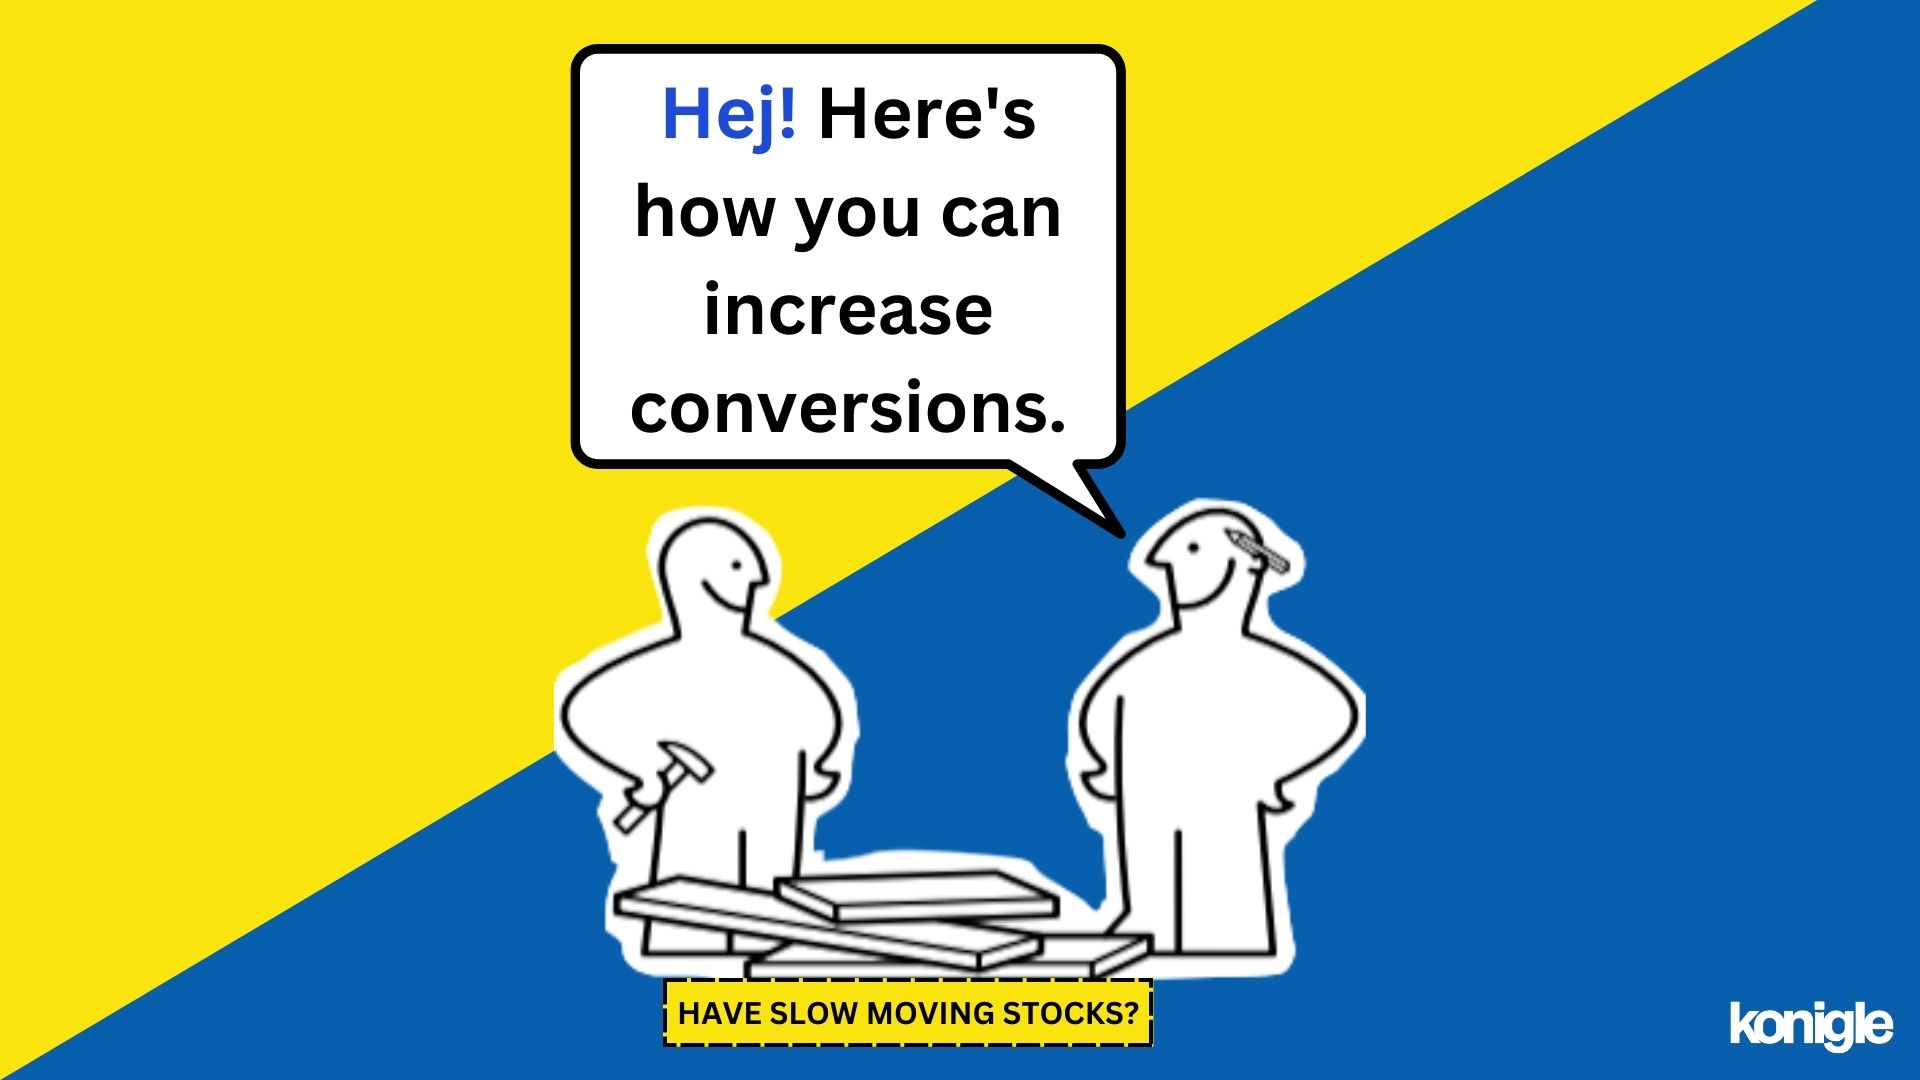 How IKEA creates a sense of urgency amongst shoppers to increase conversions.